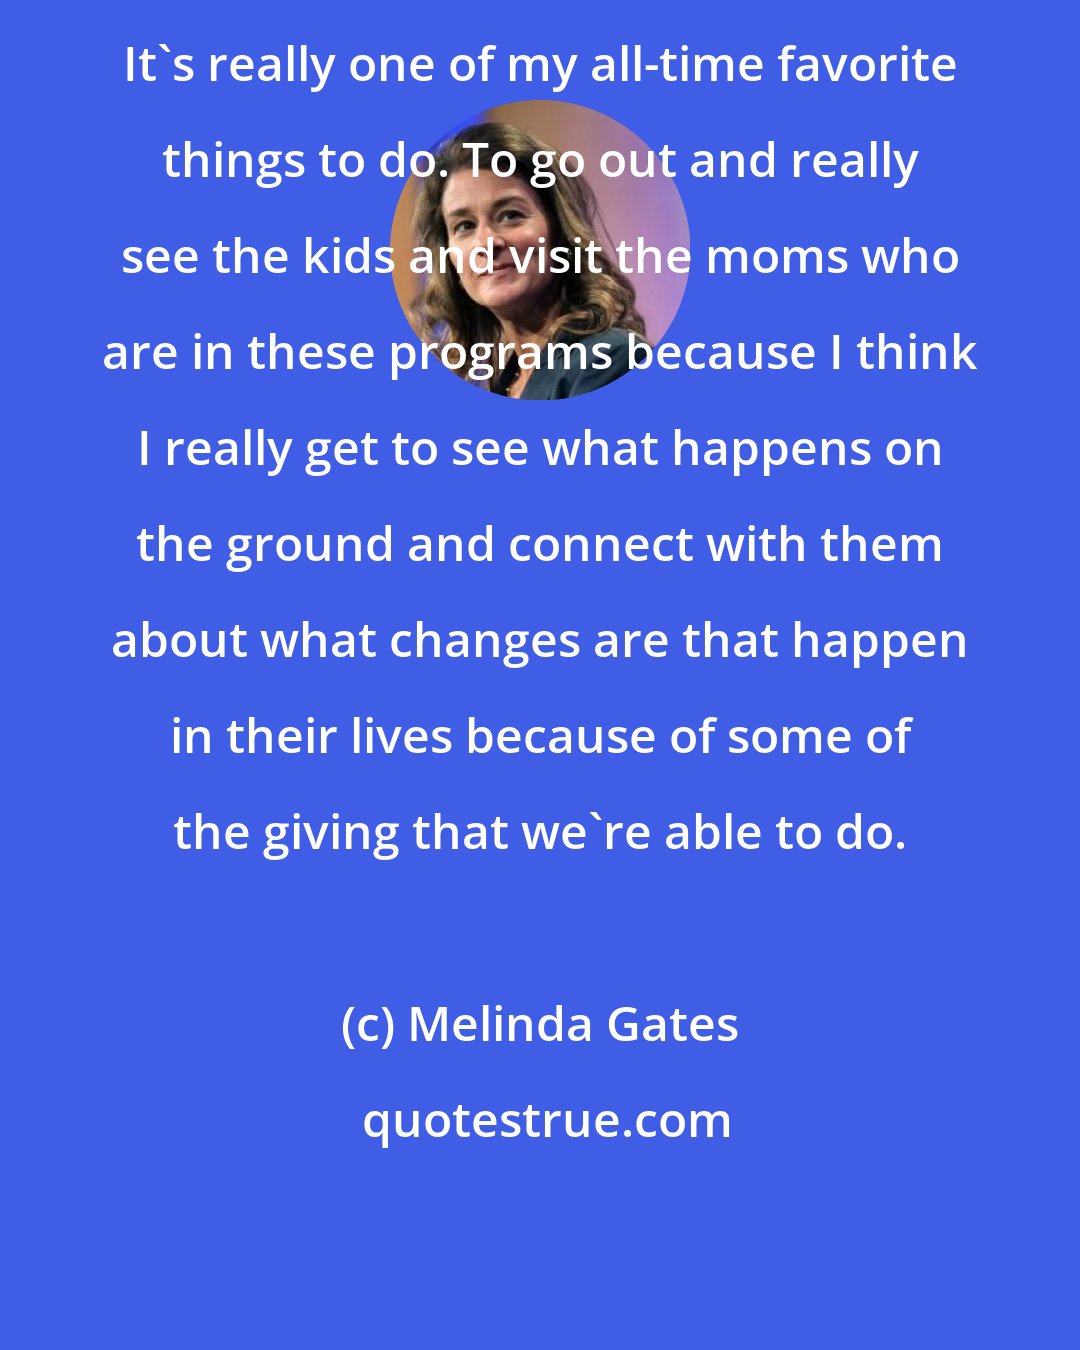 Melinda Gates: It's really one of my all-time favorite things to do. To go out and really see the kids and visit the moms who are in these programs because I think I really get to see what happens on the ground and connect with them about what changes are that happen in their lives because of some of the giving that we're able to do.